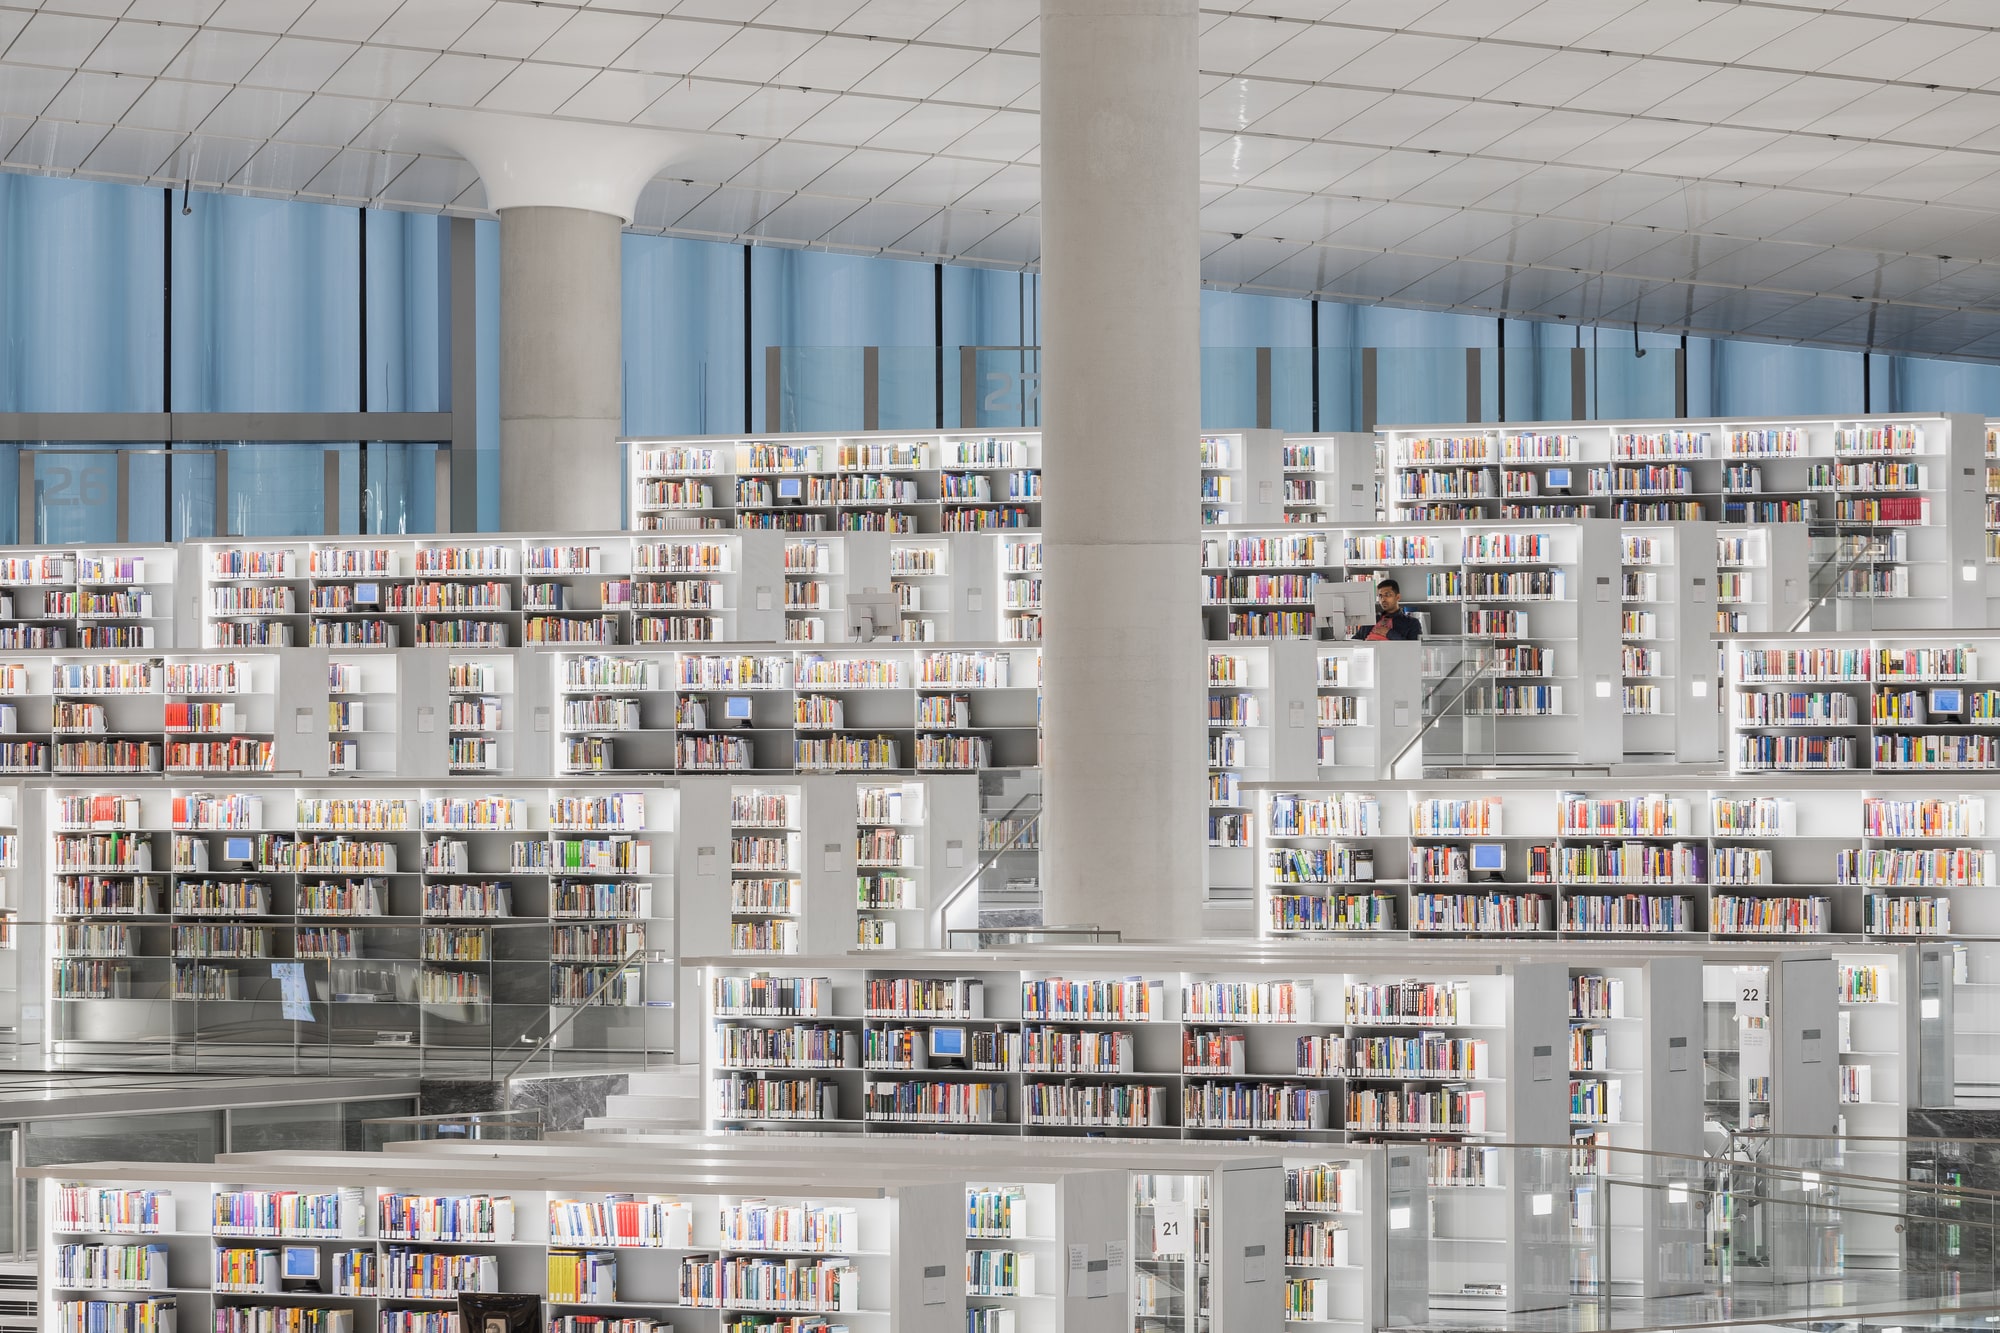 Lighting design for the National Library in Doha, Qatar